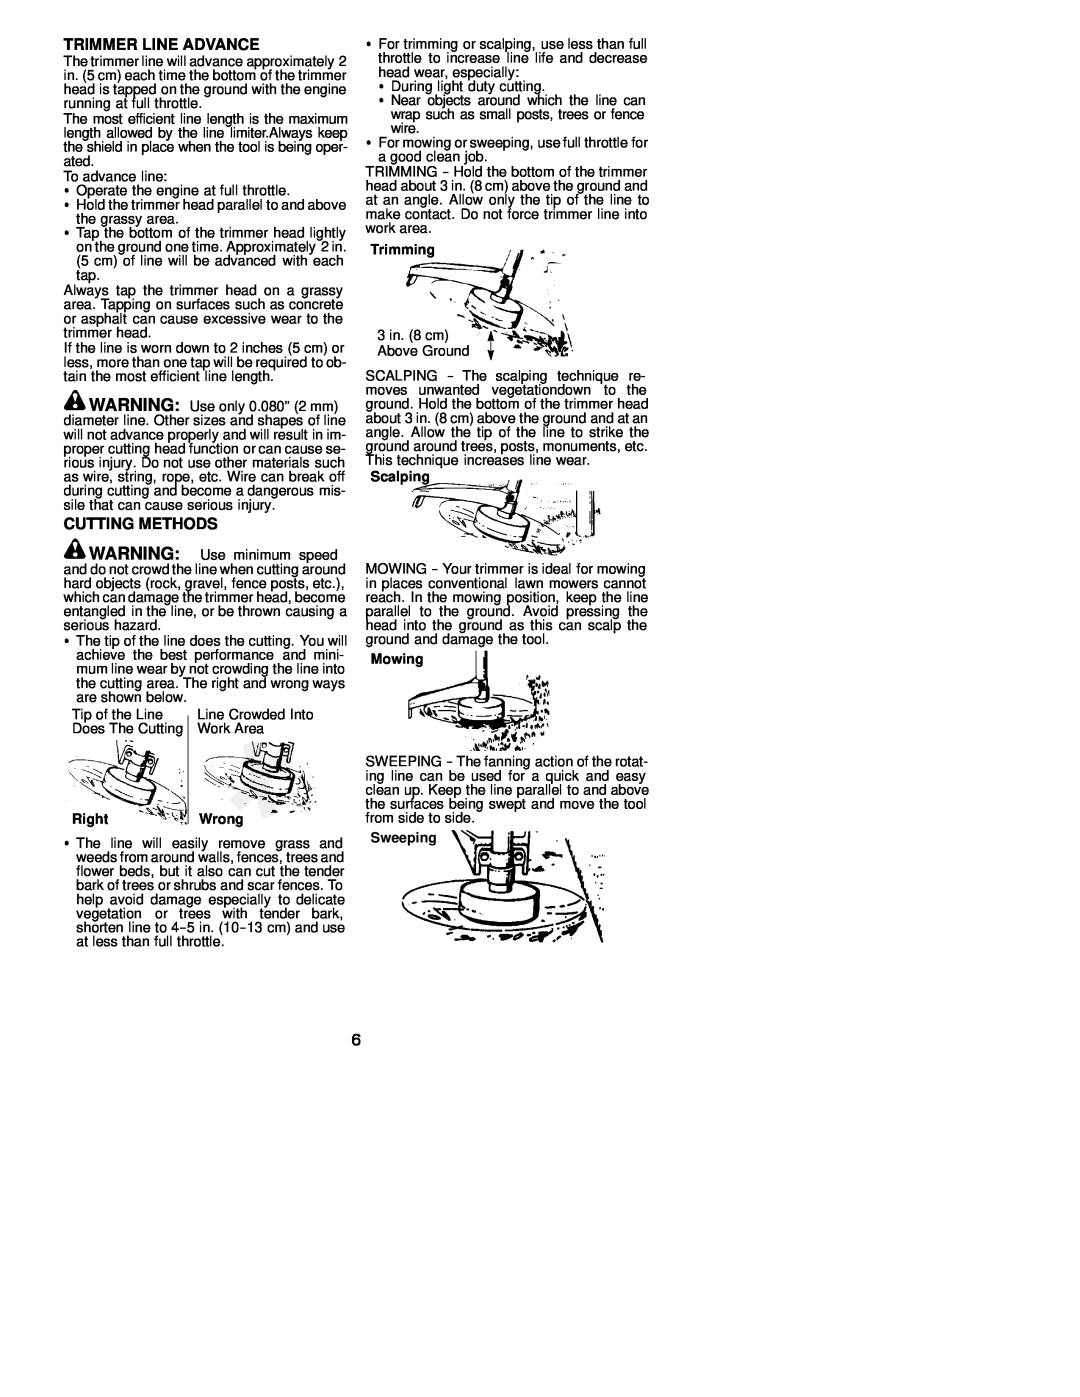 Weed Eater 530163444 instruction manual Trimmer Line Advance, Cutting Methods, Right, Trimming, Scalping, Mowing, Sweeping 